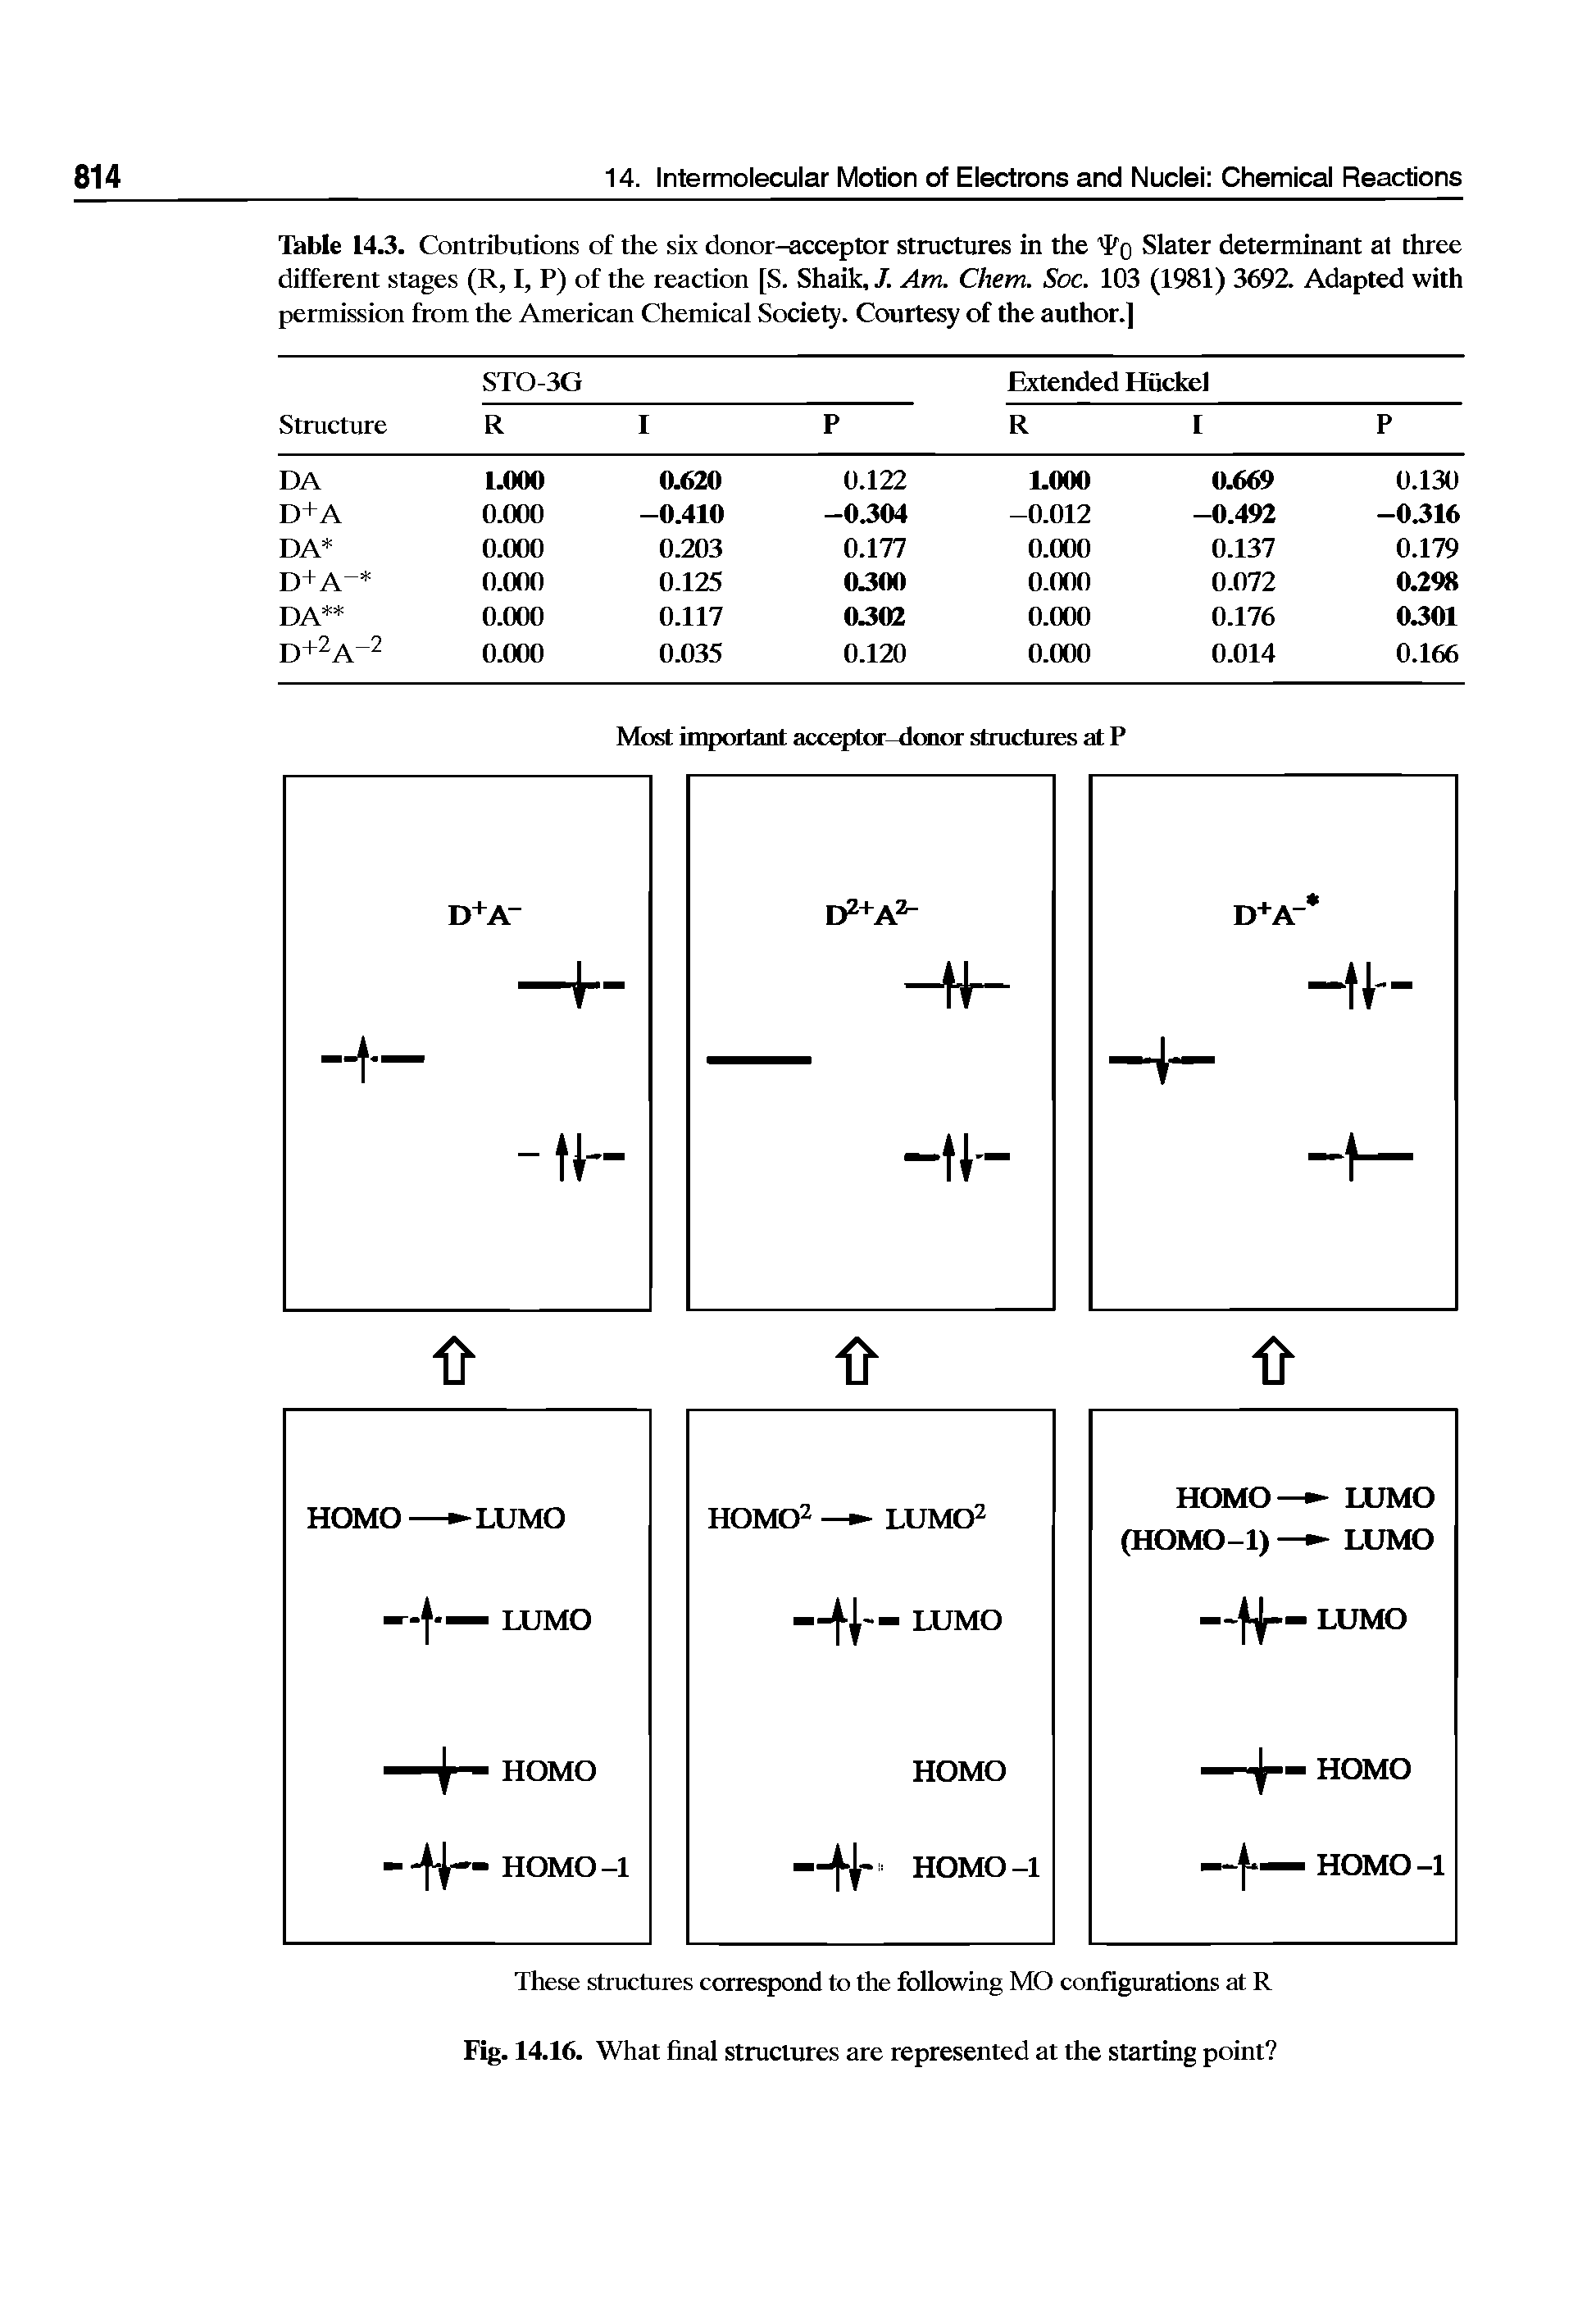 Table 14.3. Contributions of the six donor-acceptor structures in the Pq Slater determinant at three different stages (R, I, P) of the reaction [S. Shaik, J. Am. Chem. Soc. 103 (1981) 369Z Adapted with permission from the American Chemical Society. Courtesy of the author.]...